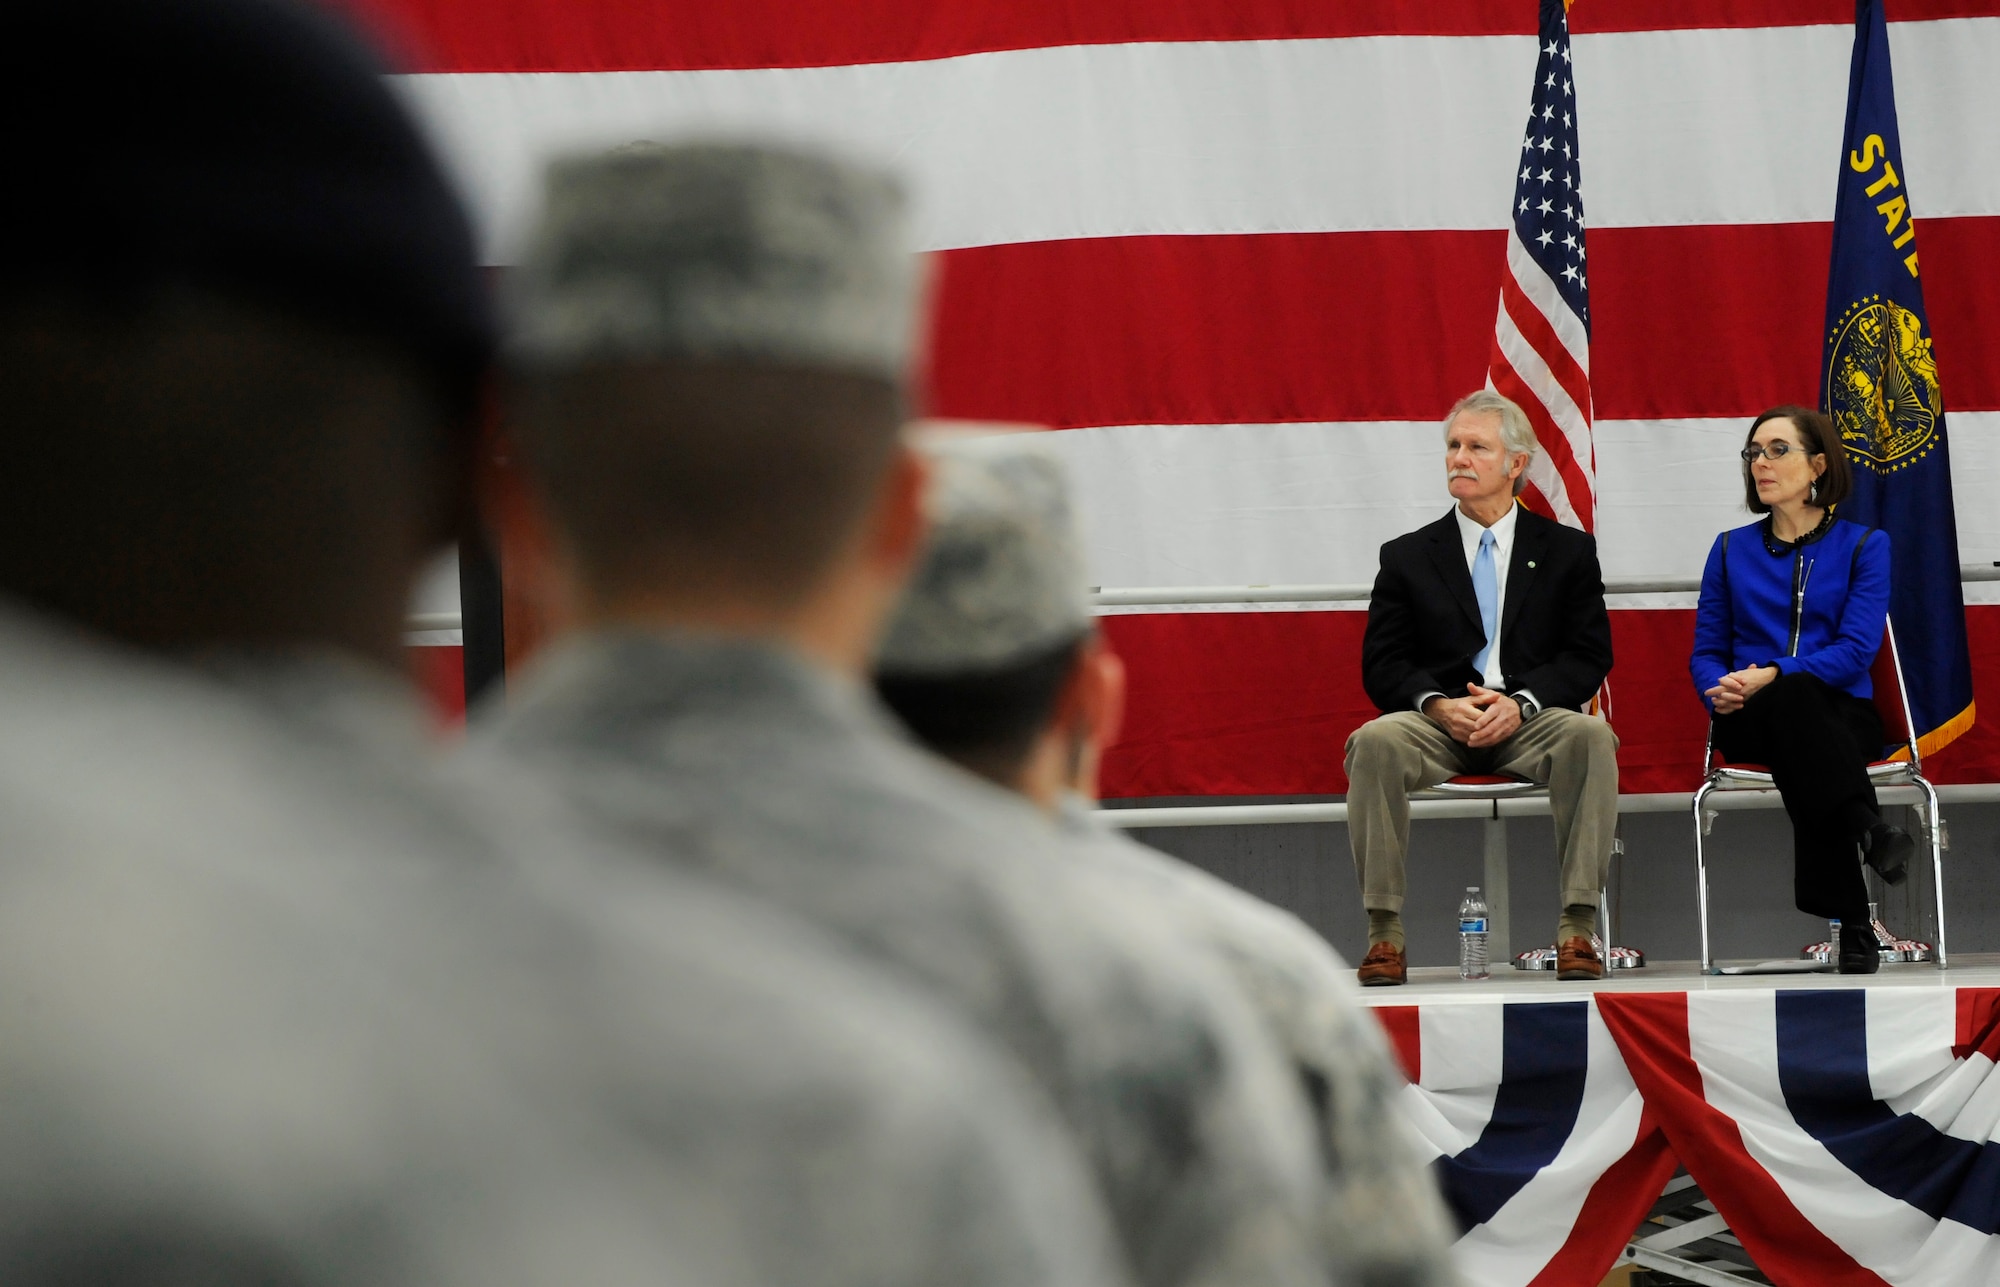 Oregon Governor John Kitzhaber and Oregon Sec. of State Kate Brown listen to remarks by Maj. Gen. Daniel R. Hokanson, The Adjutant General, Oregon, during the Demobilization Ceremony for the 142nd Fighter Wing Civil Engineer Squadron and Security Forces Squadron at the Portland Air National Guard Base, Ore., Dec. 7, 2014. (U.S. Air National Guard photo by Tech. Sgt. John Hughel, 142nd Fighter Wing Public Affairs/Released)